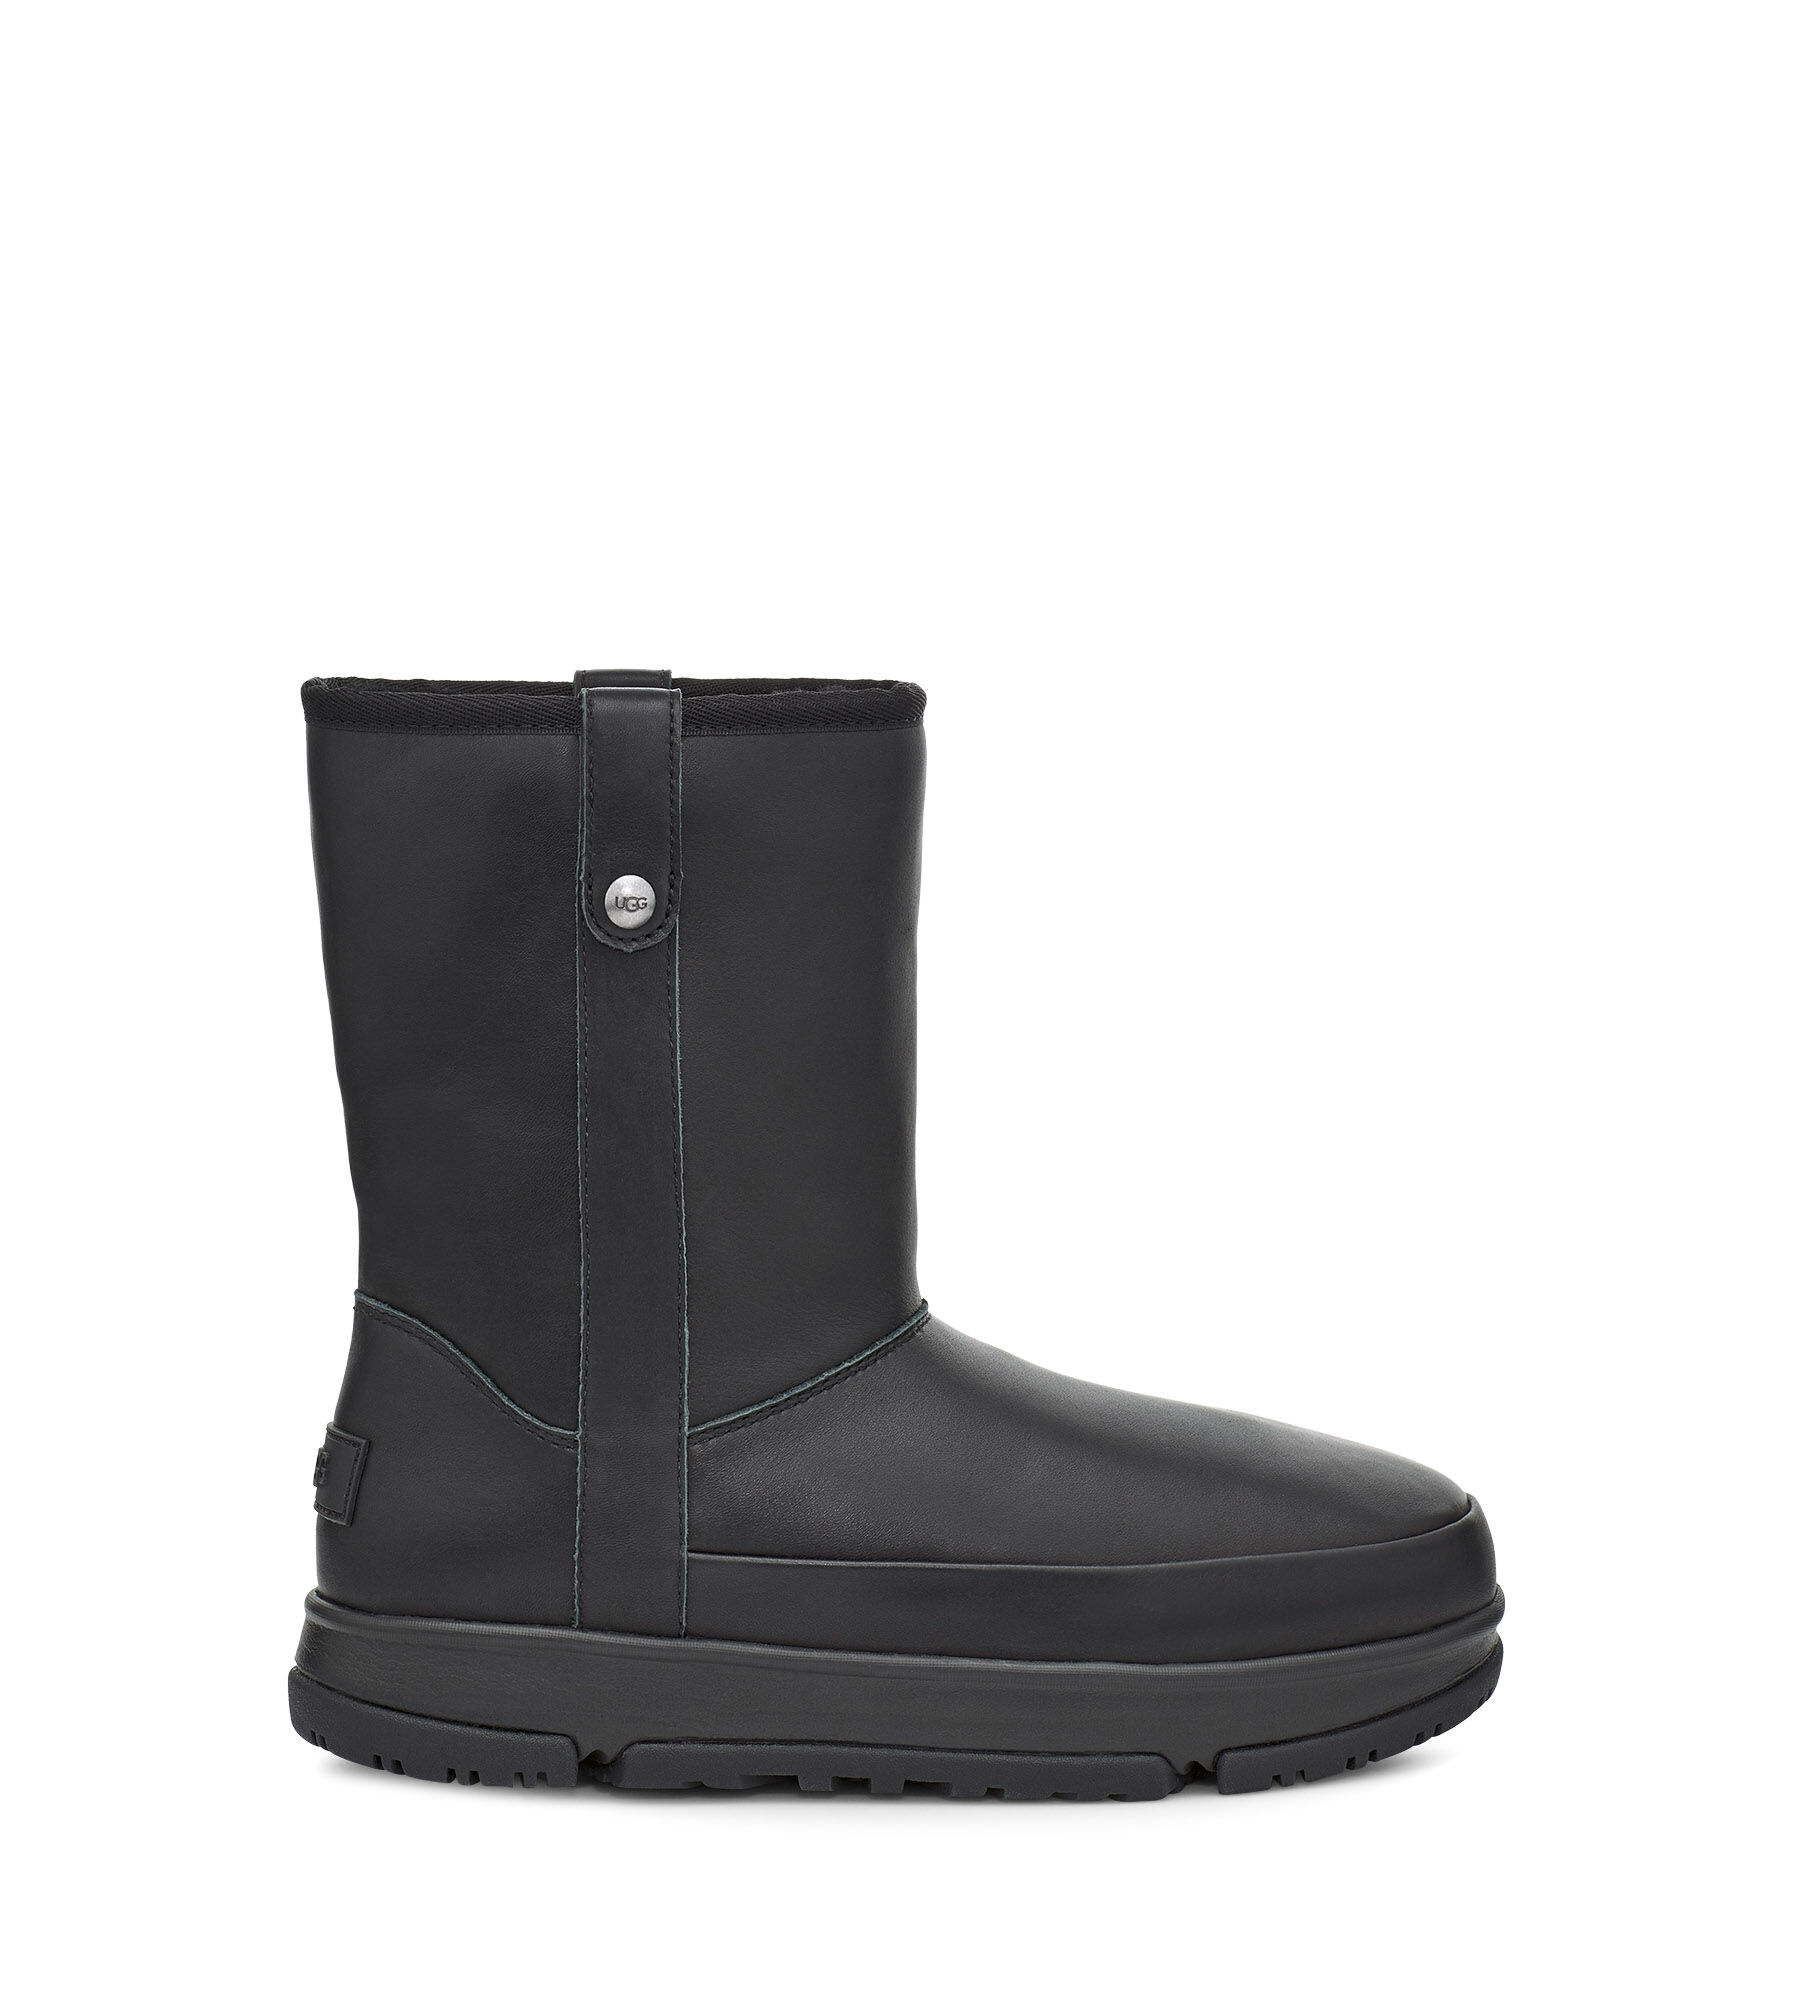 women's short leather ugg boots